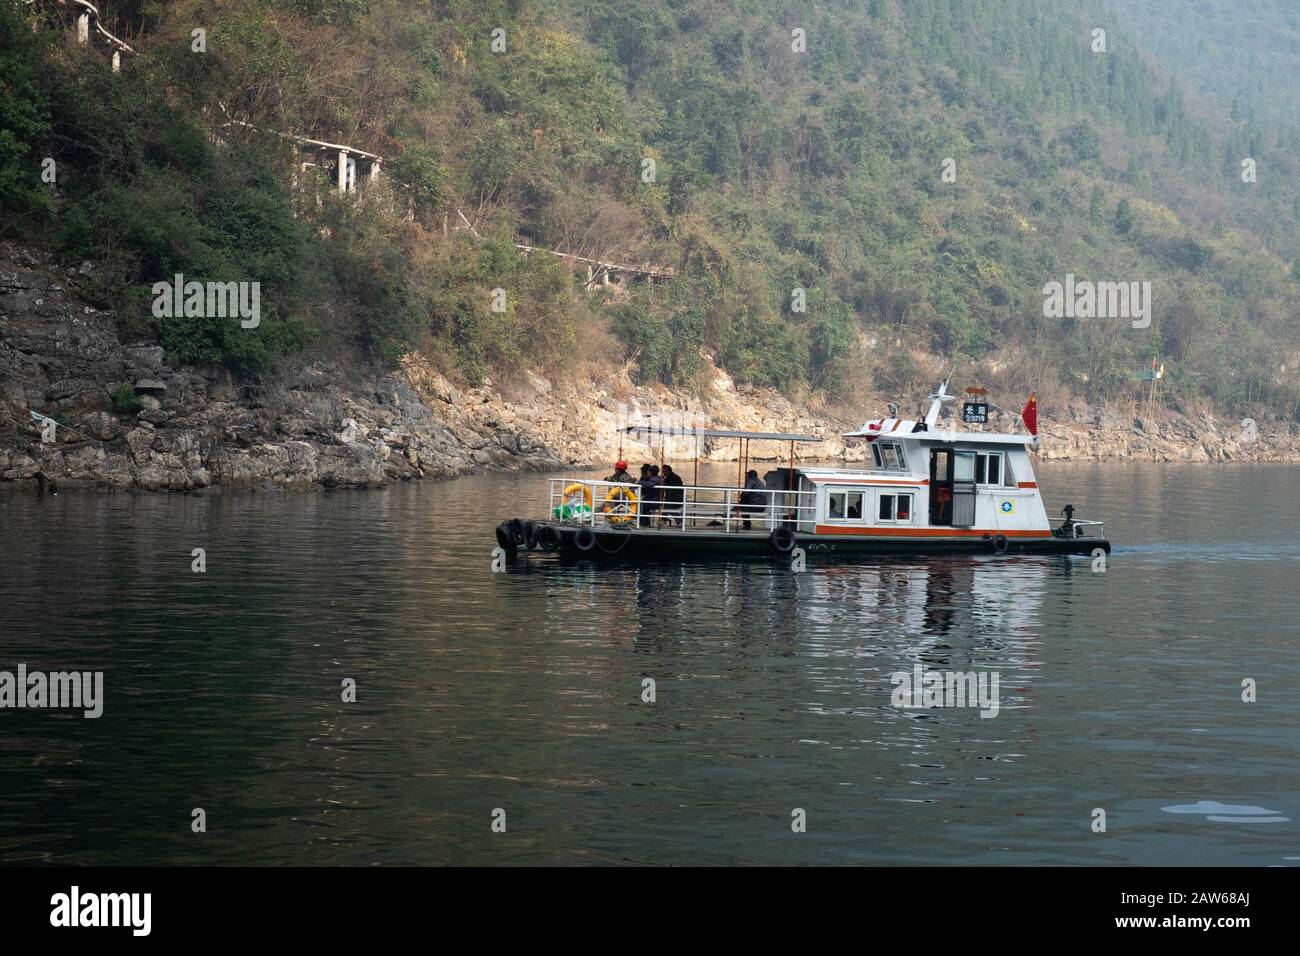 YICHANG, HUBEI / CHINA - DEC 25 2019:  Chinese fisherman's sailing boat at Yangtze river for the traveler along with the three gorges area, The part o Stock Photo